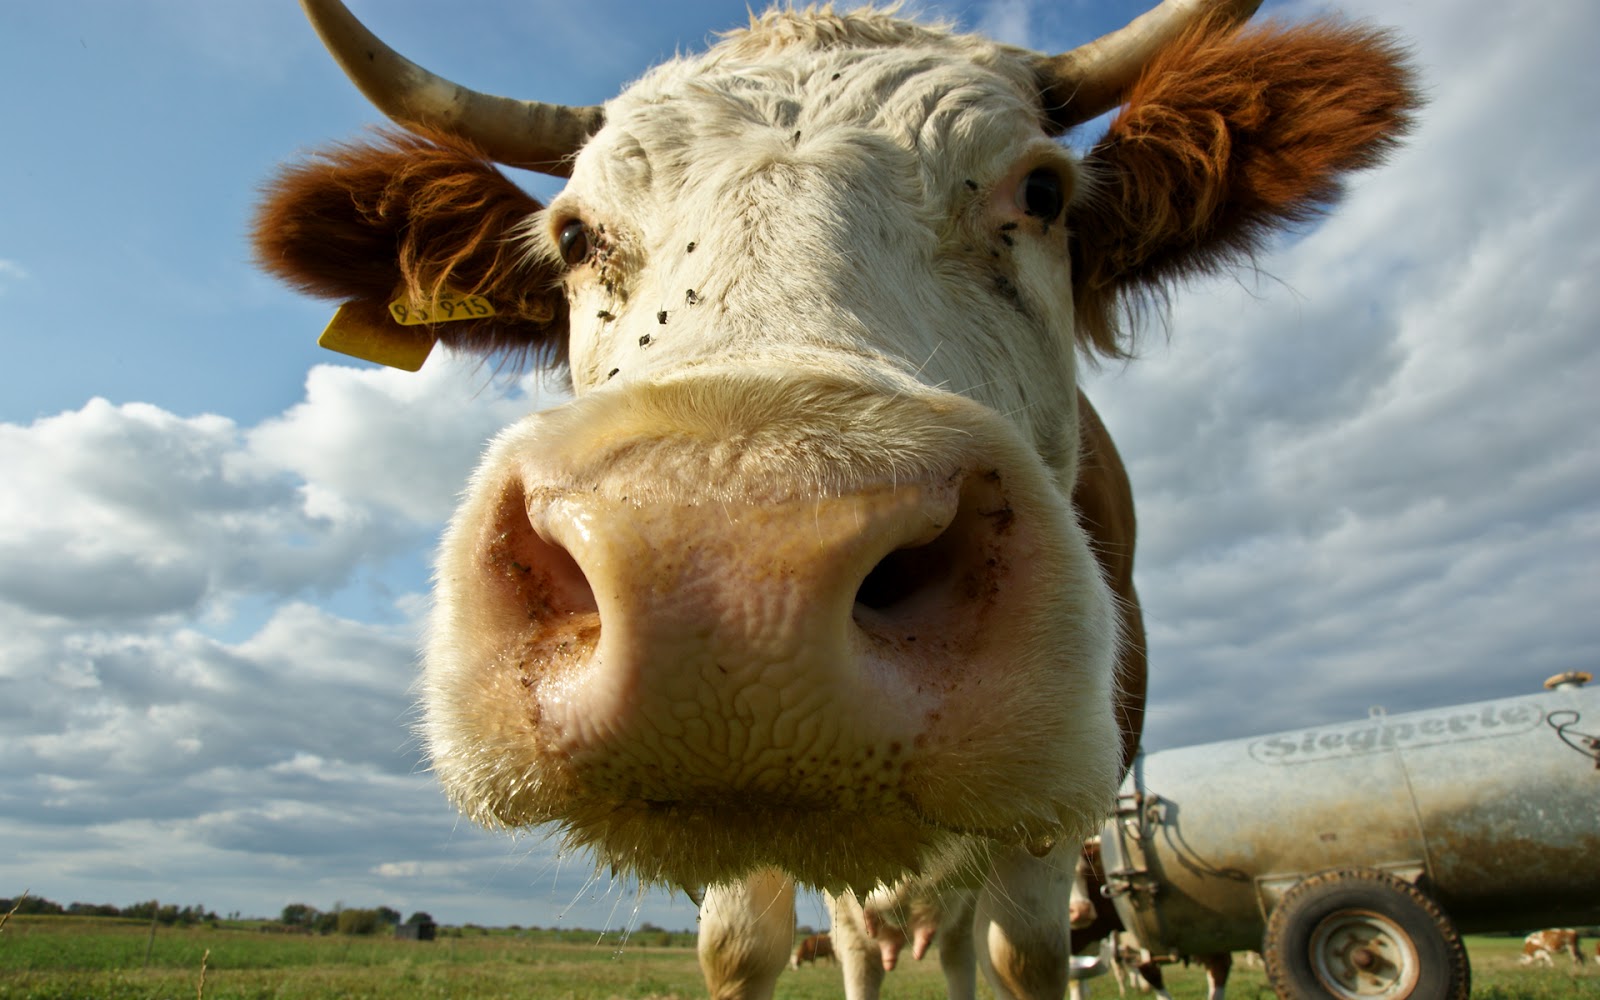 HD Cows Wallpaper With The Portrait Picture Of A Cow